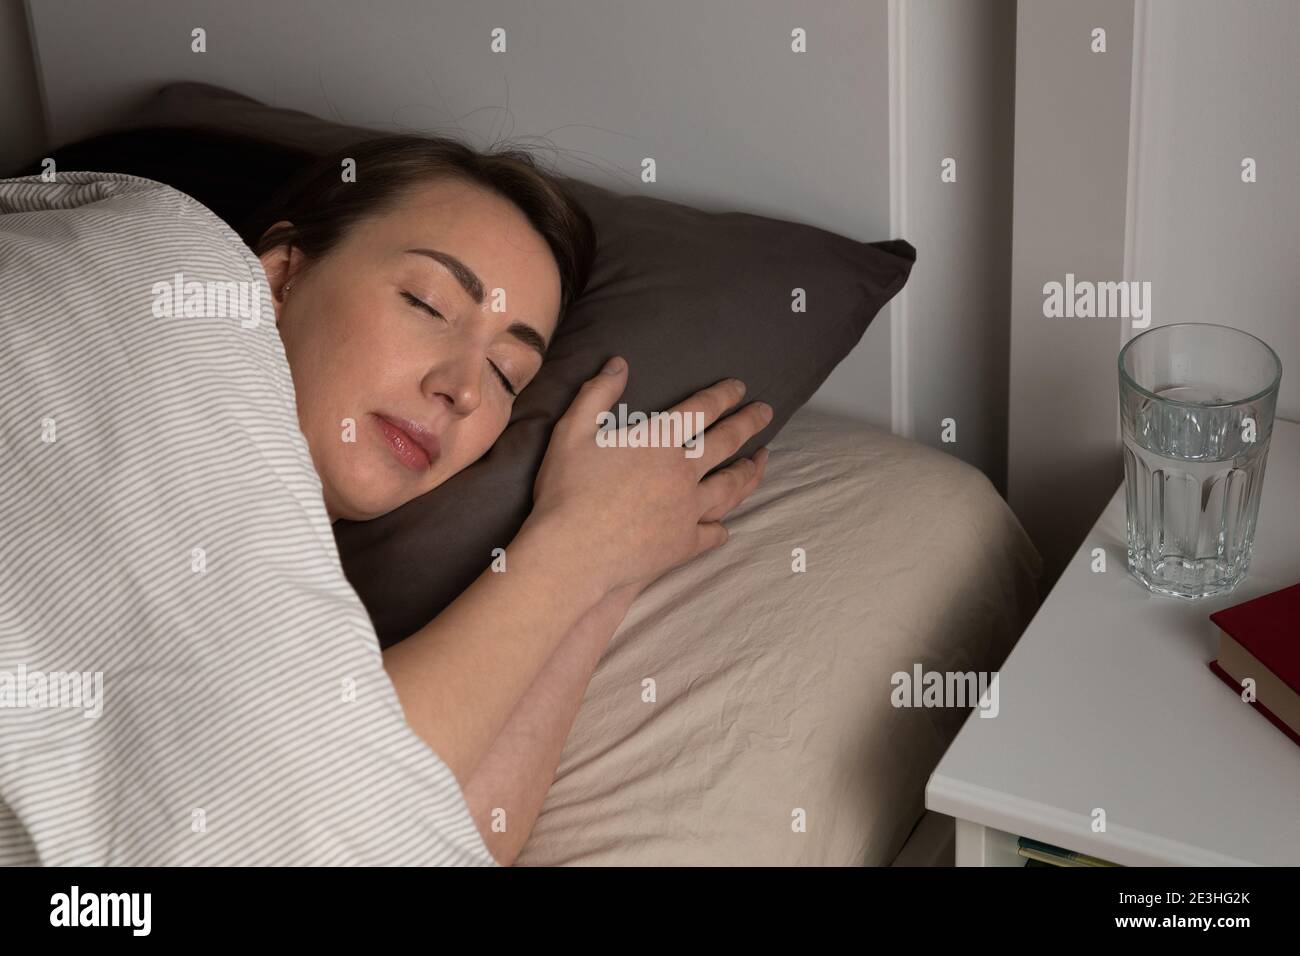 Young women sleeping in bed at night with a peaceful smile. Happy dreams and good sleep. Stock Photo